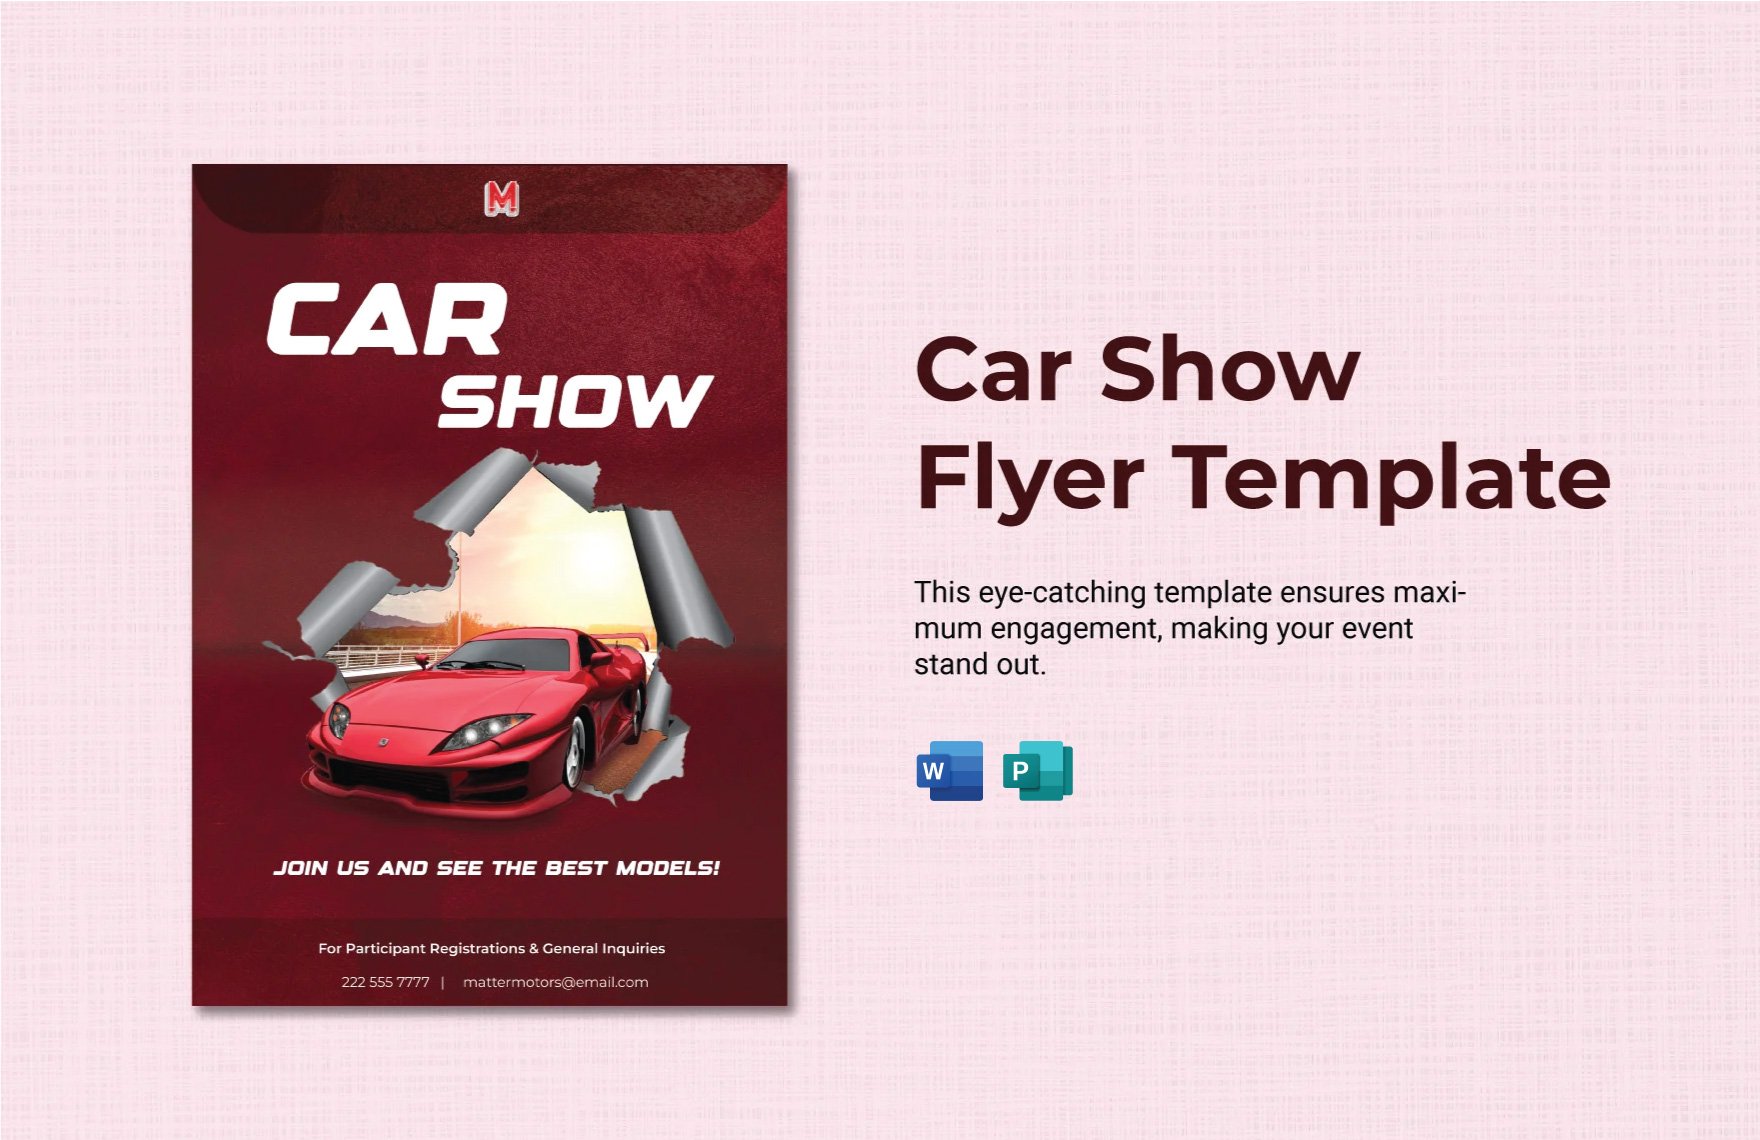 Car Show Flyer Template in Word, Publisher